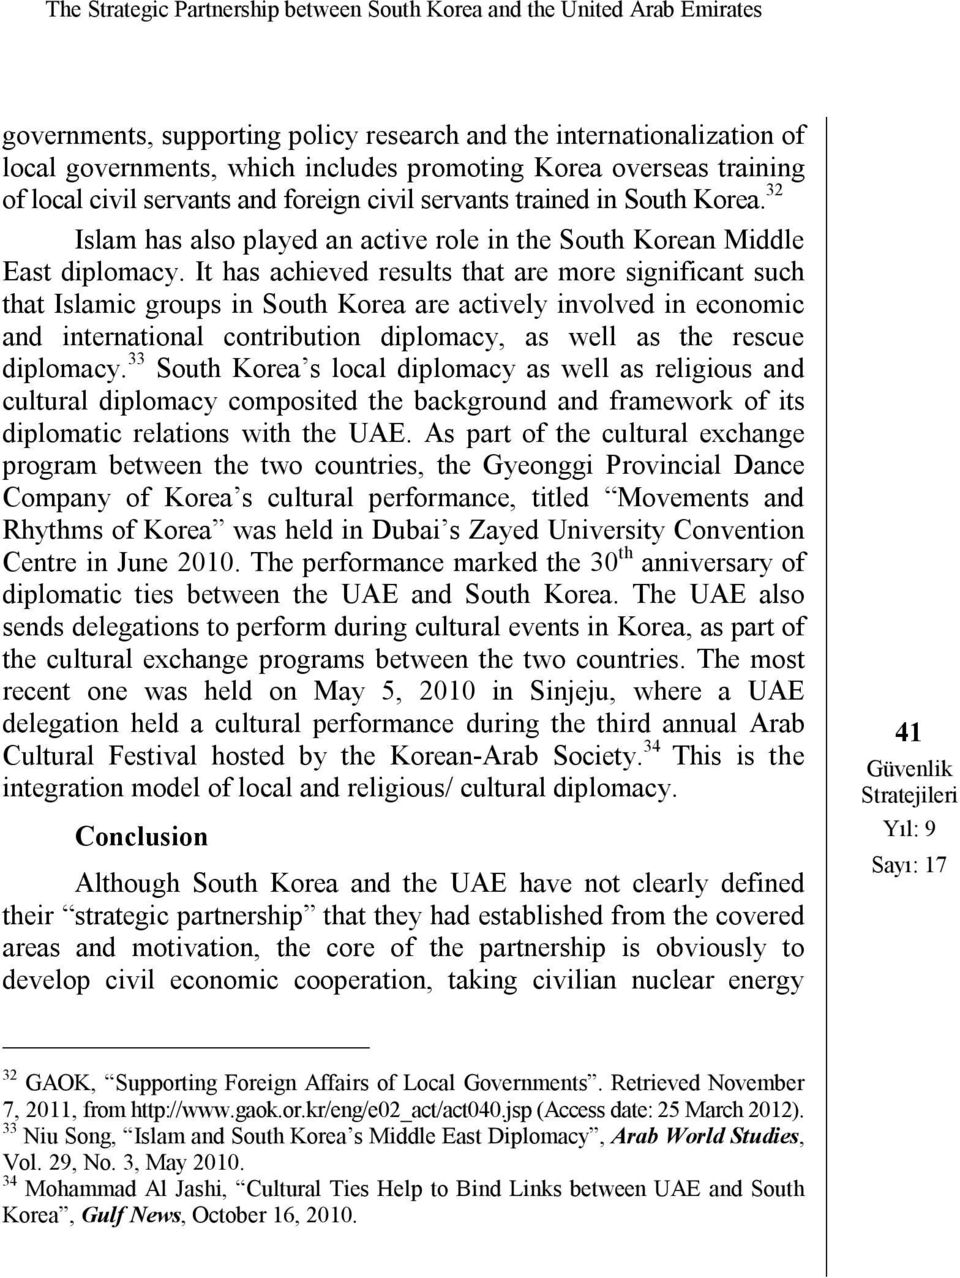 It has achieved results that are more significant such that Islamic groups in South Korea are actively involved in economic and international contribution diplomacy, as well as the rescue diplomacy.